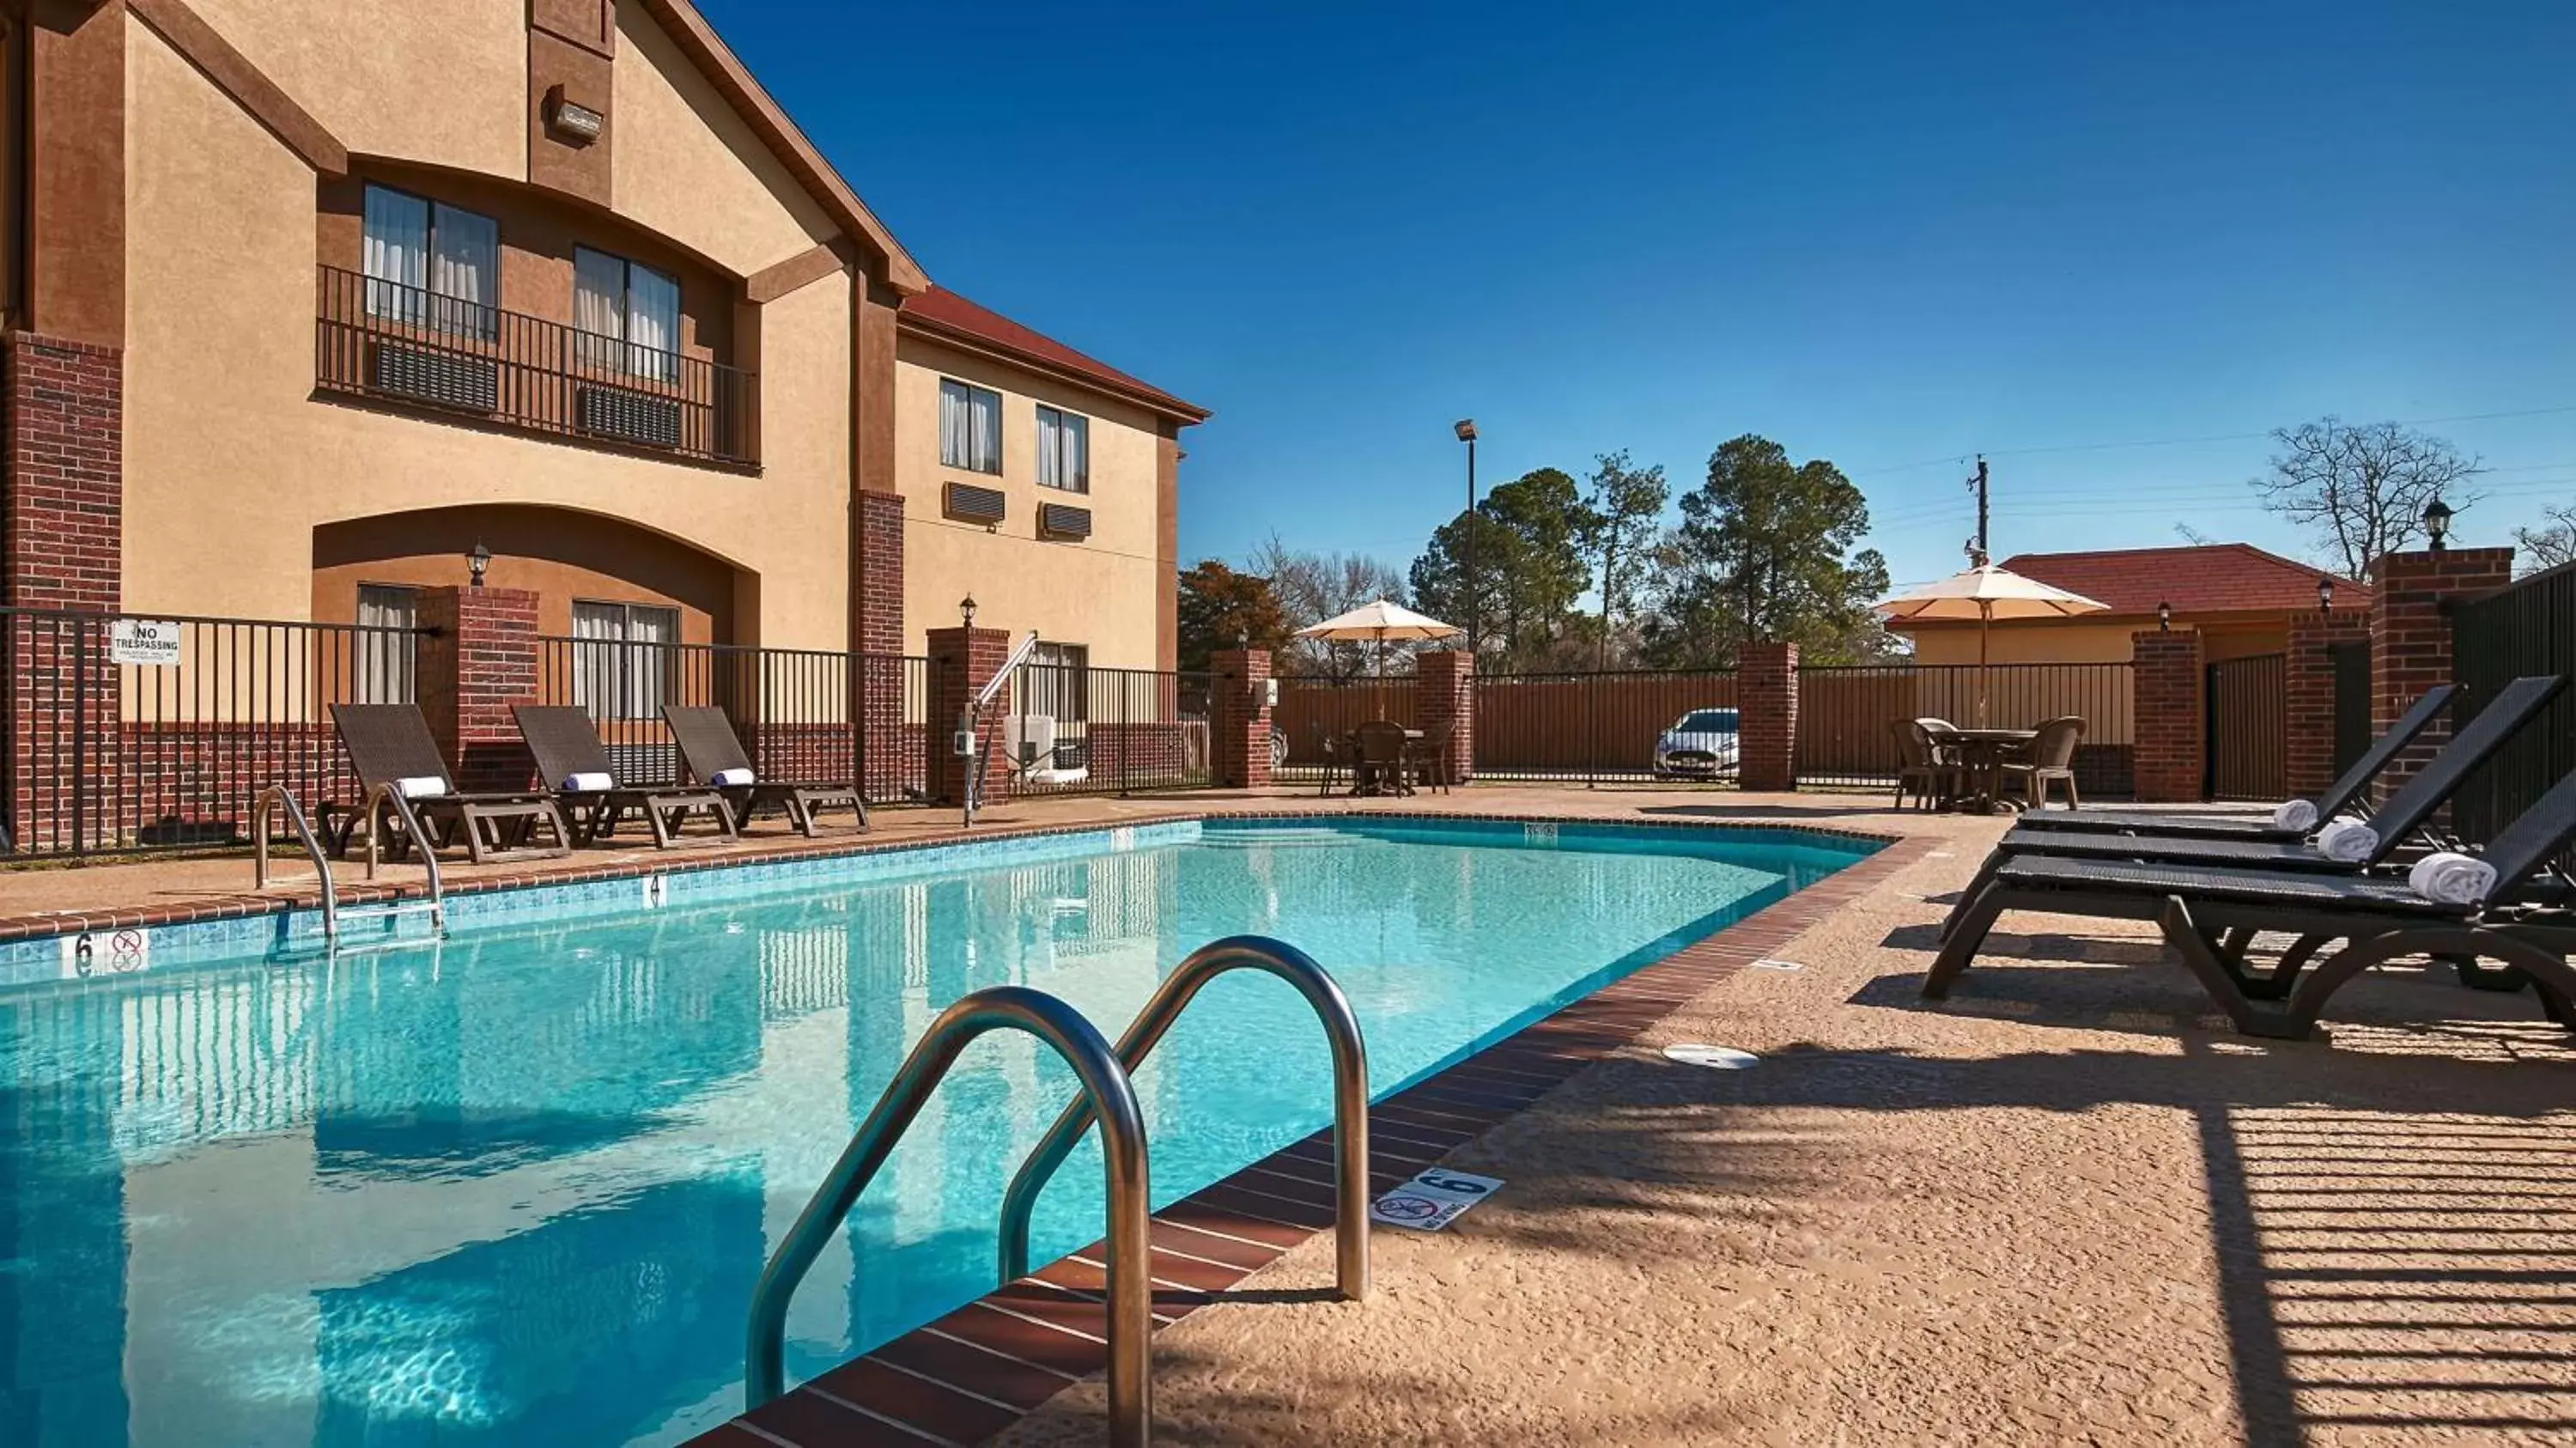 On site, Swimming Pool in Best Western Bayou Inn and Suites